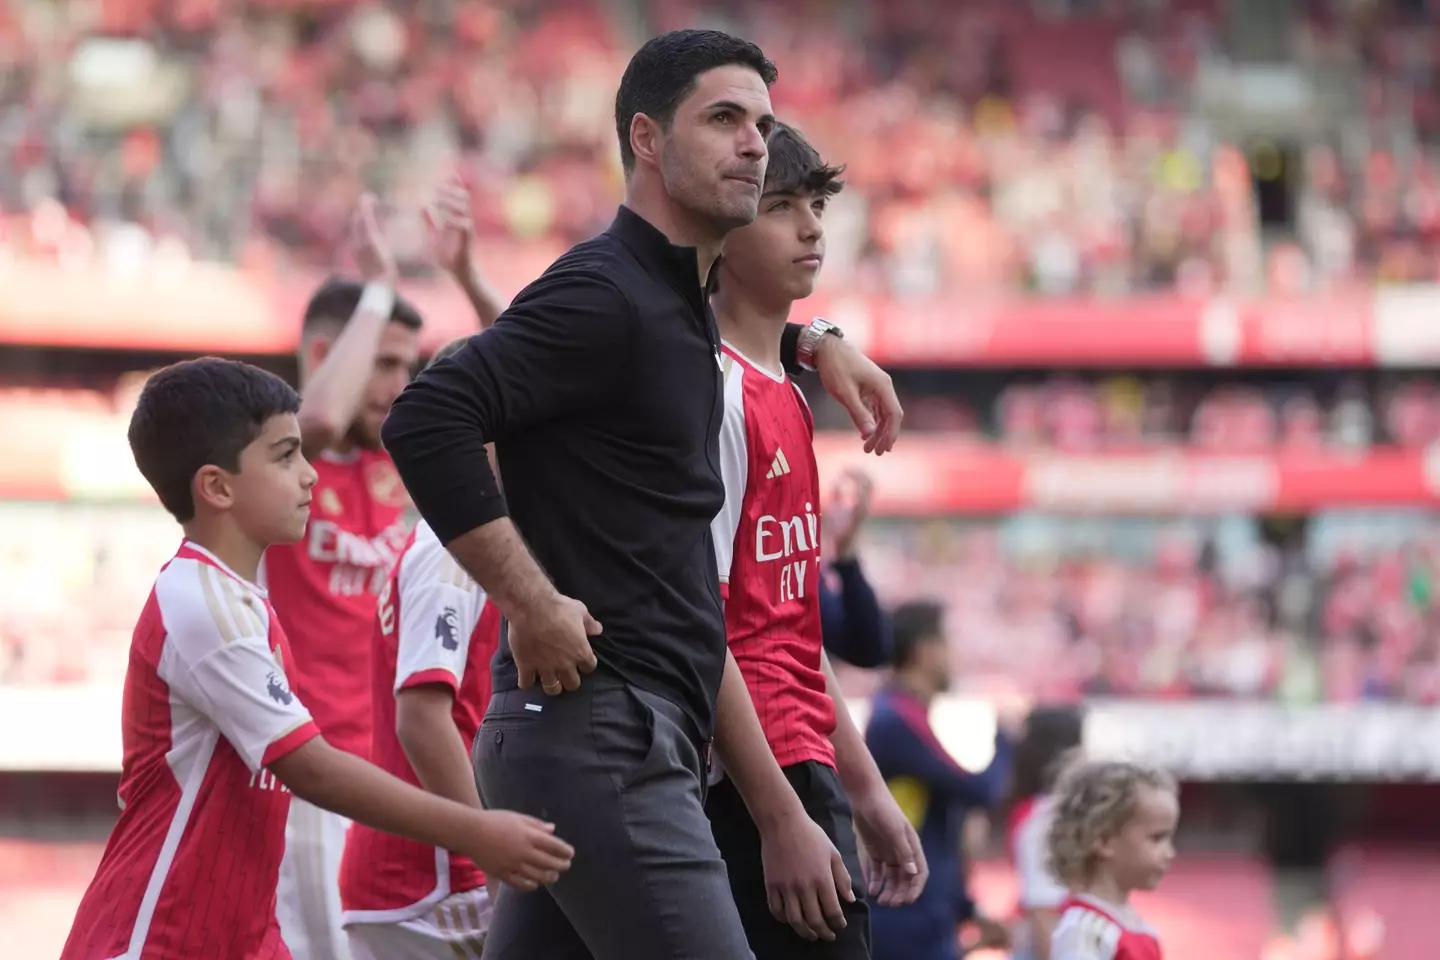 Mikel Arteta takes in the atmosphere with his sons. Image: Alamy